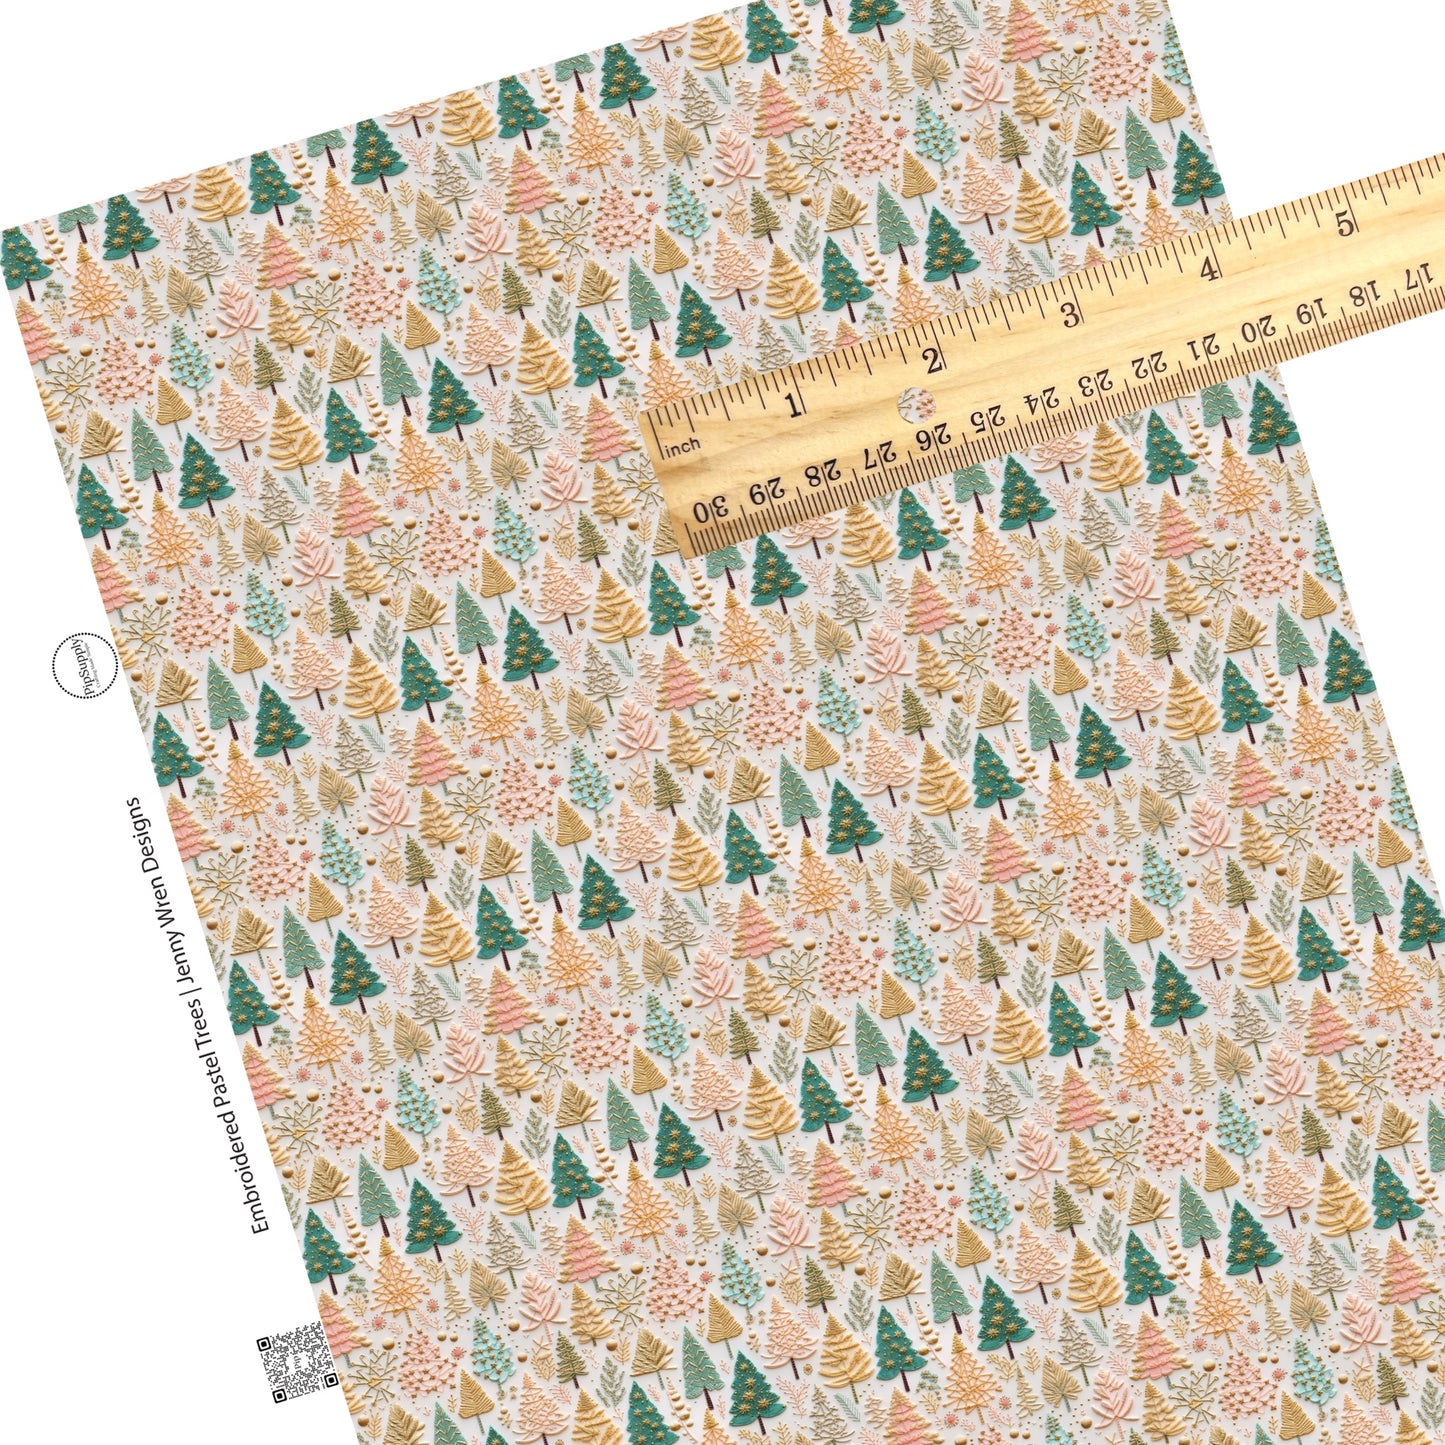 These holiday sewn pattern themed faux leather sheets contain the following design elements: green and pastel Christmas trees on cream. Our CPSIA compliant faux leather sheets or rolls can be used for all types of crafting projects.